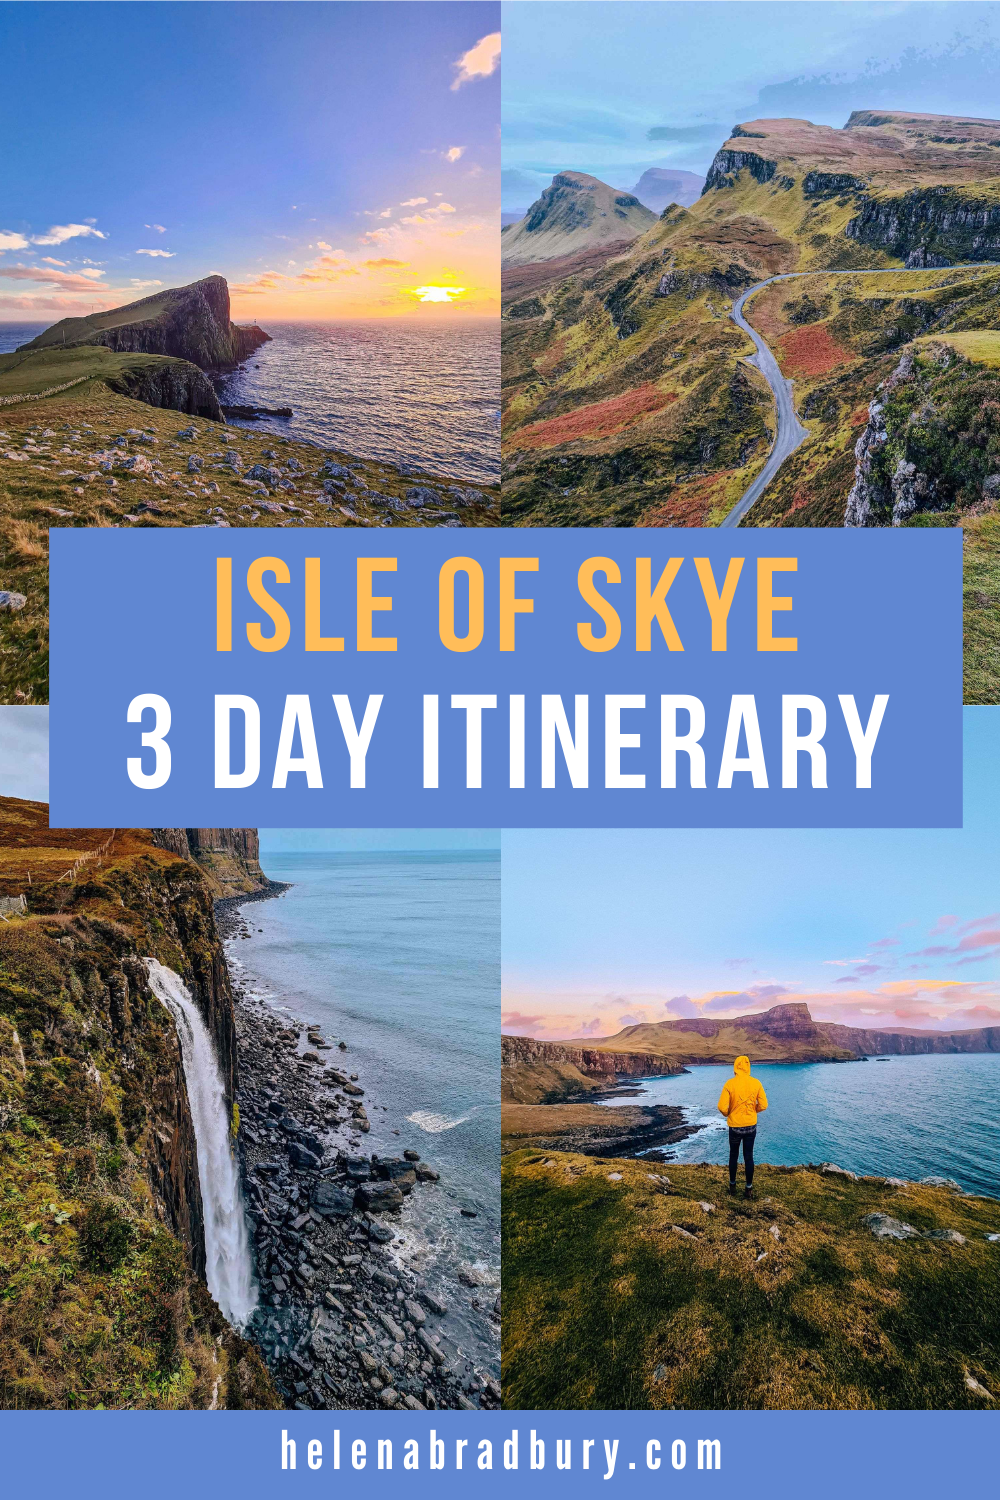 Visit the stunning Isle of Skye, Scotland in the Scottish Highlands and islands on this perfect Isle of Skye itinerary for 3 days. 3 Days in Isle of Skye is perfect to see iconic places like Old Man of Storr, the Fairy Pools, Fairy Glen and Talisker…